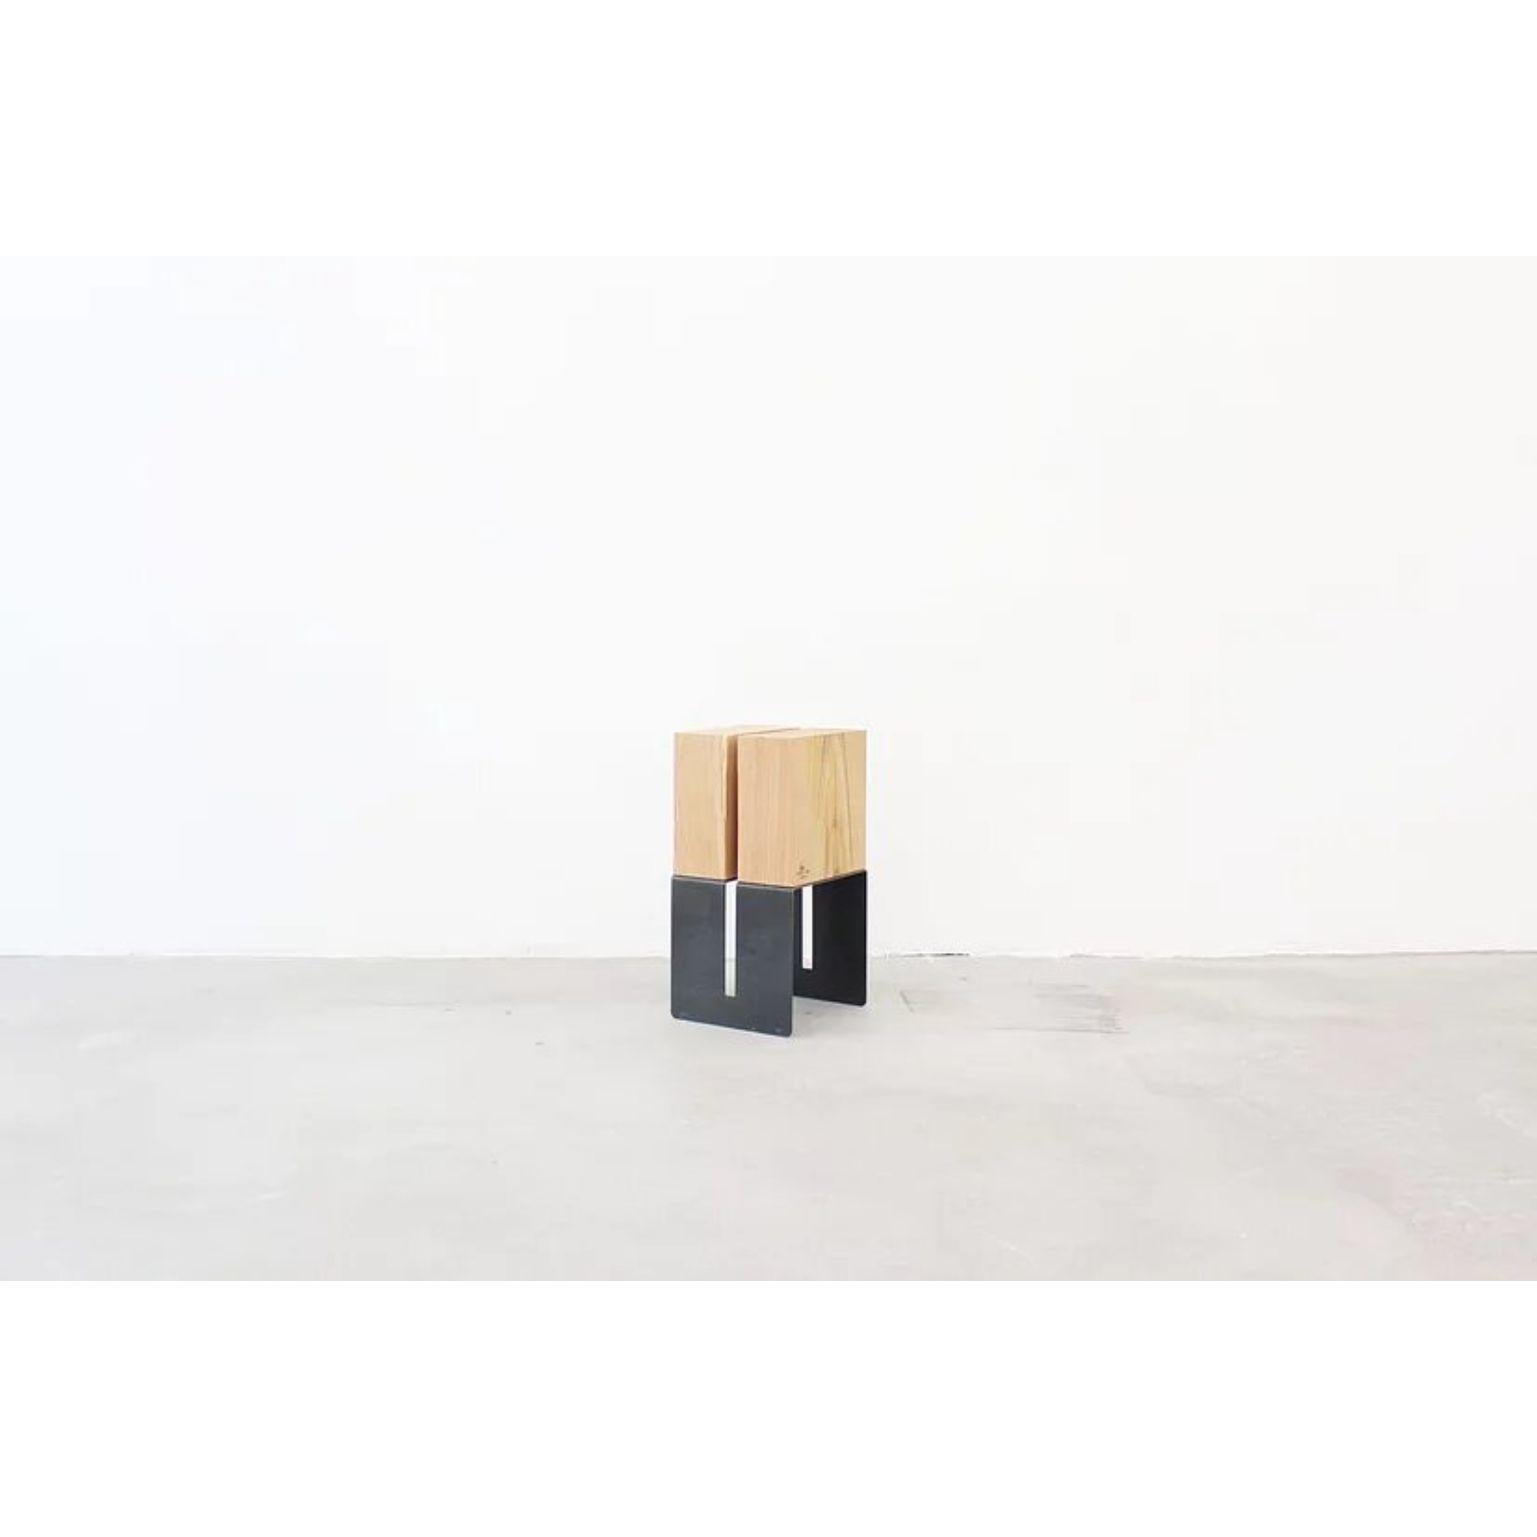 Simmis stool by La Cube
Madrid, 2016
Materials: Iron, Chesnut
Dimensions: 45 x 25 x 25 cm

Simmis stool has been created with the intention to experiment with geometric shapes, intervening on the form as well as on the texture of the product.